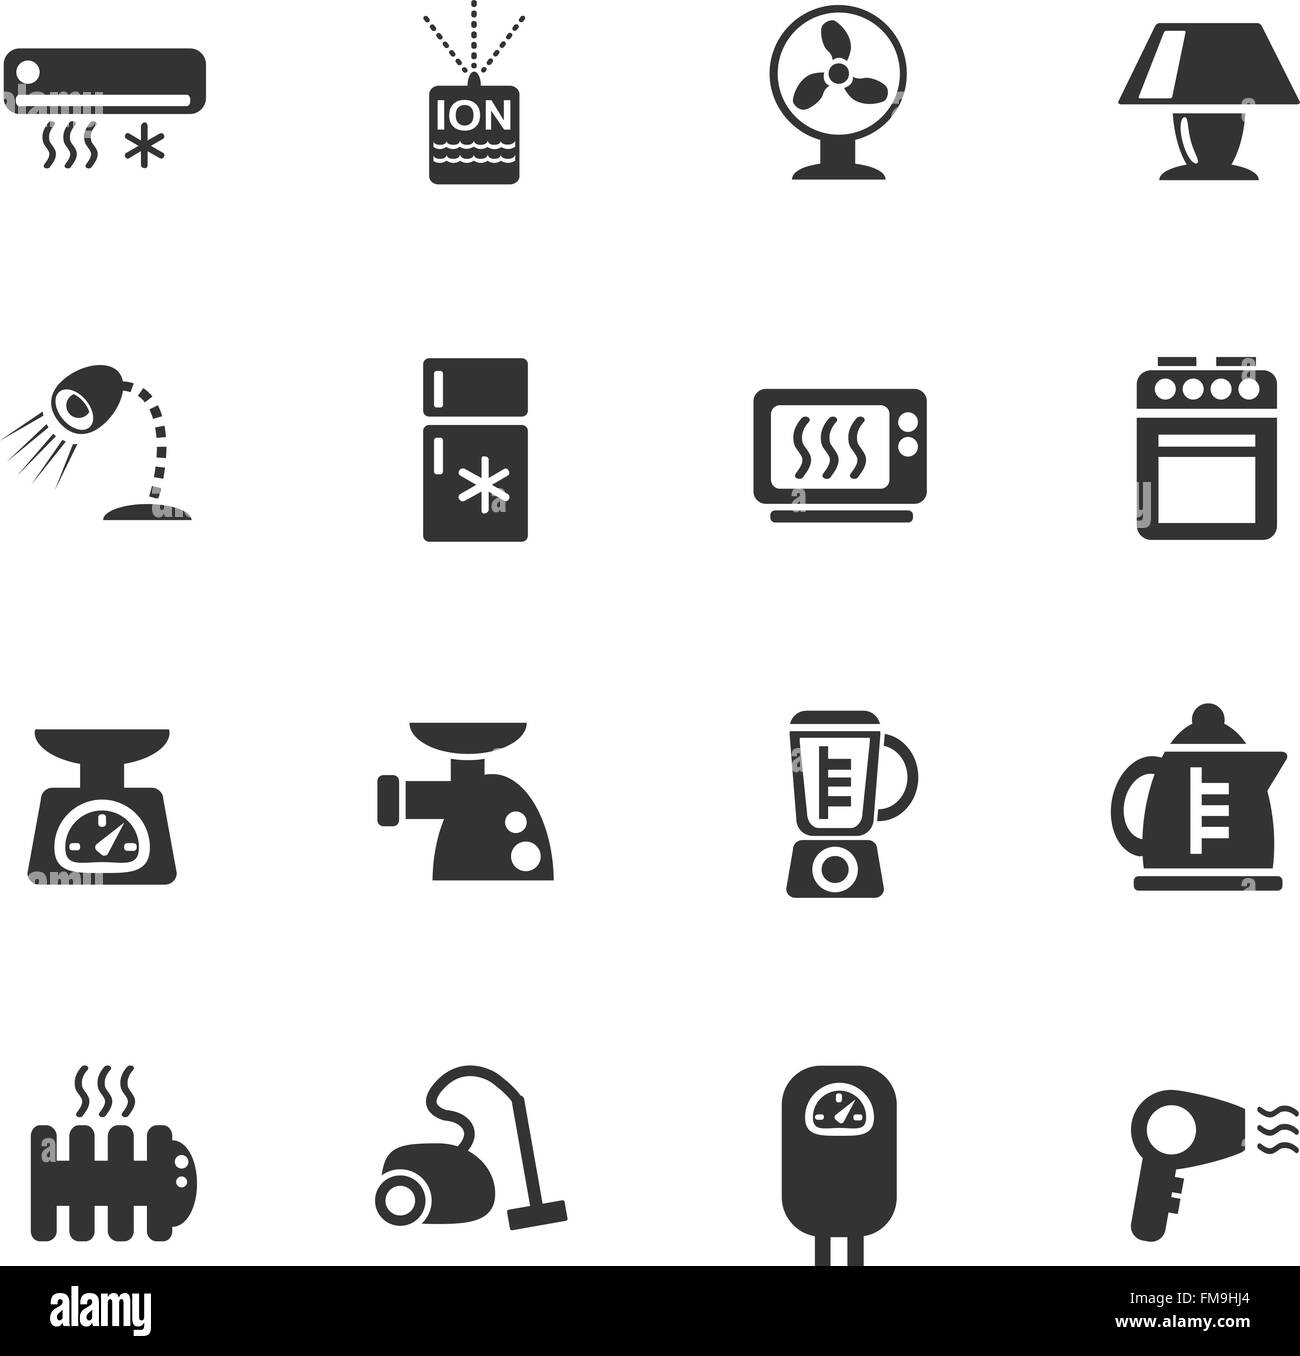 home appliances web icons for user interface design Stock Vector